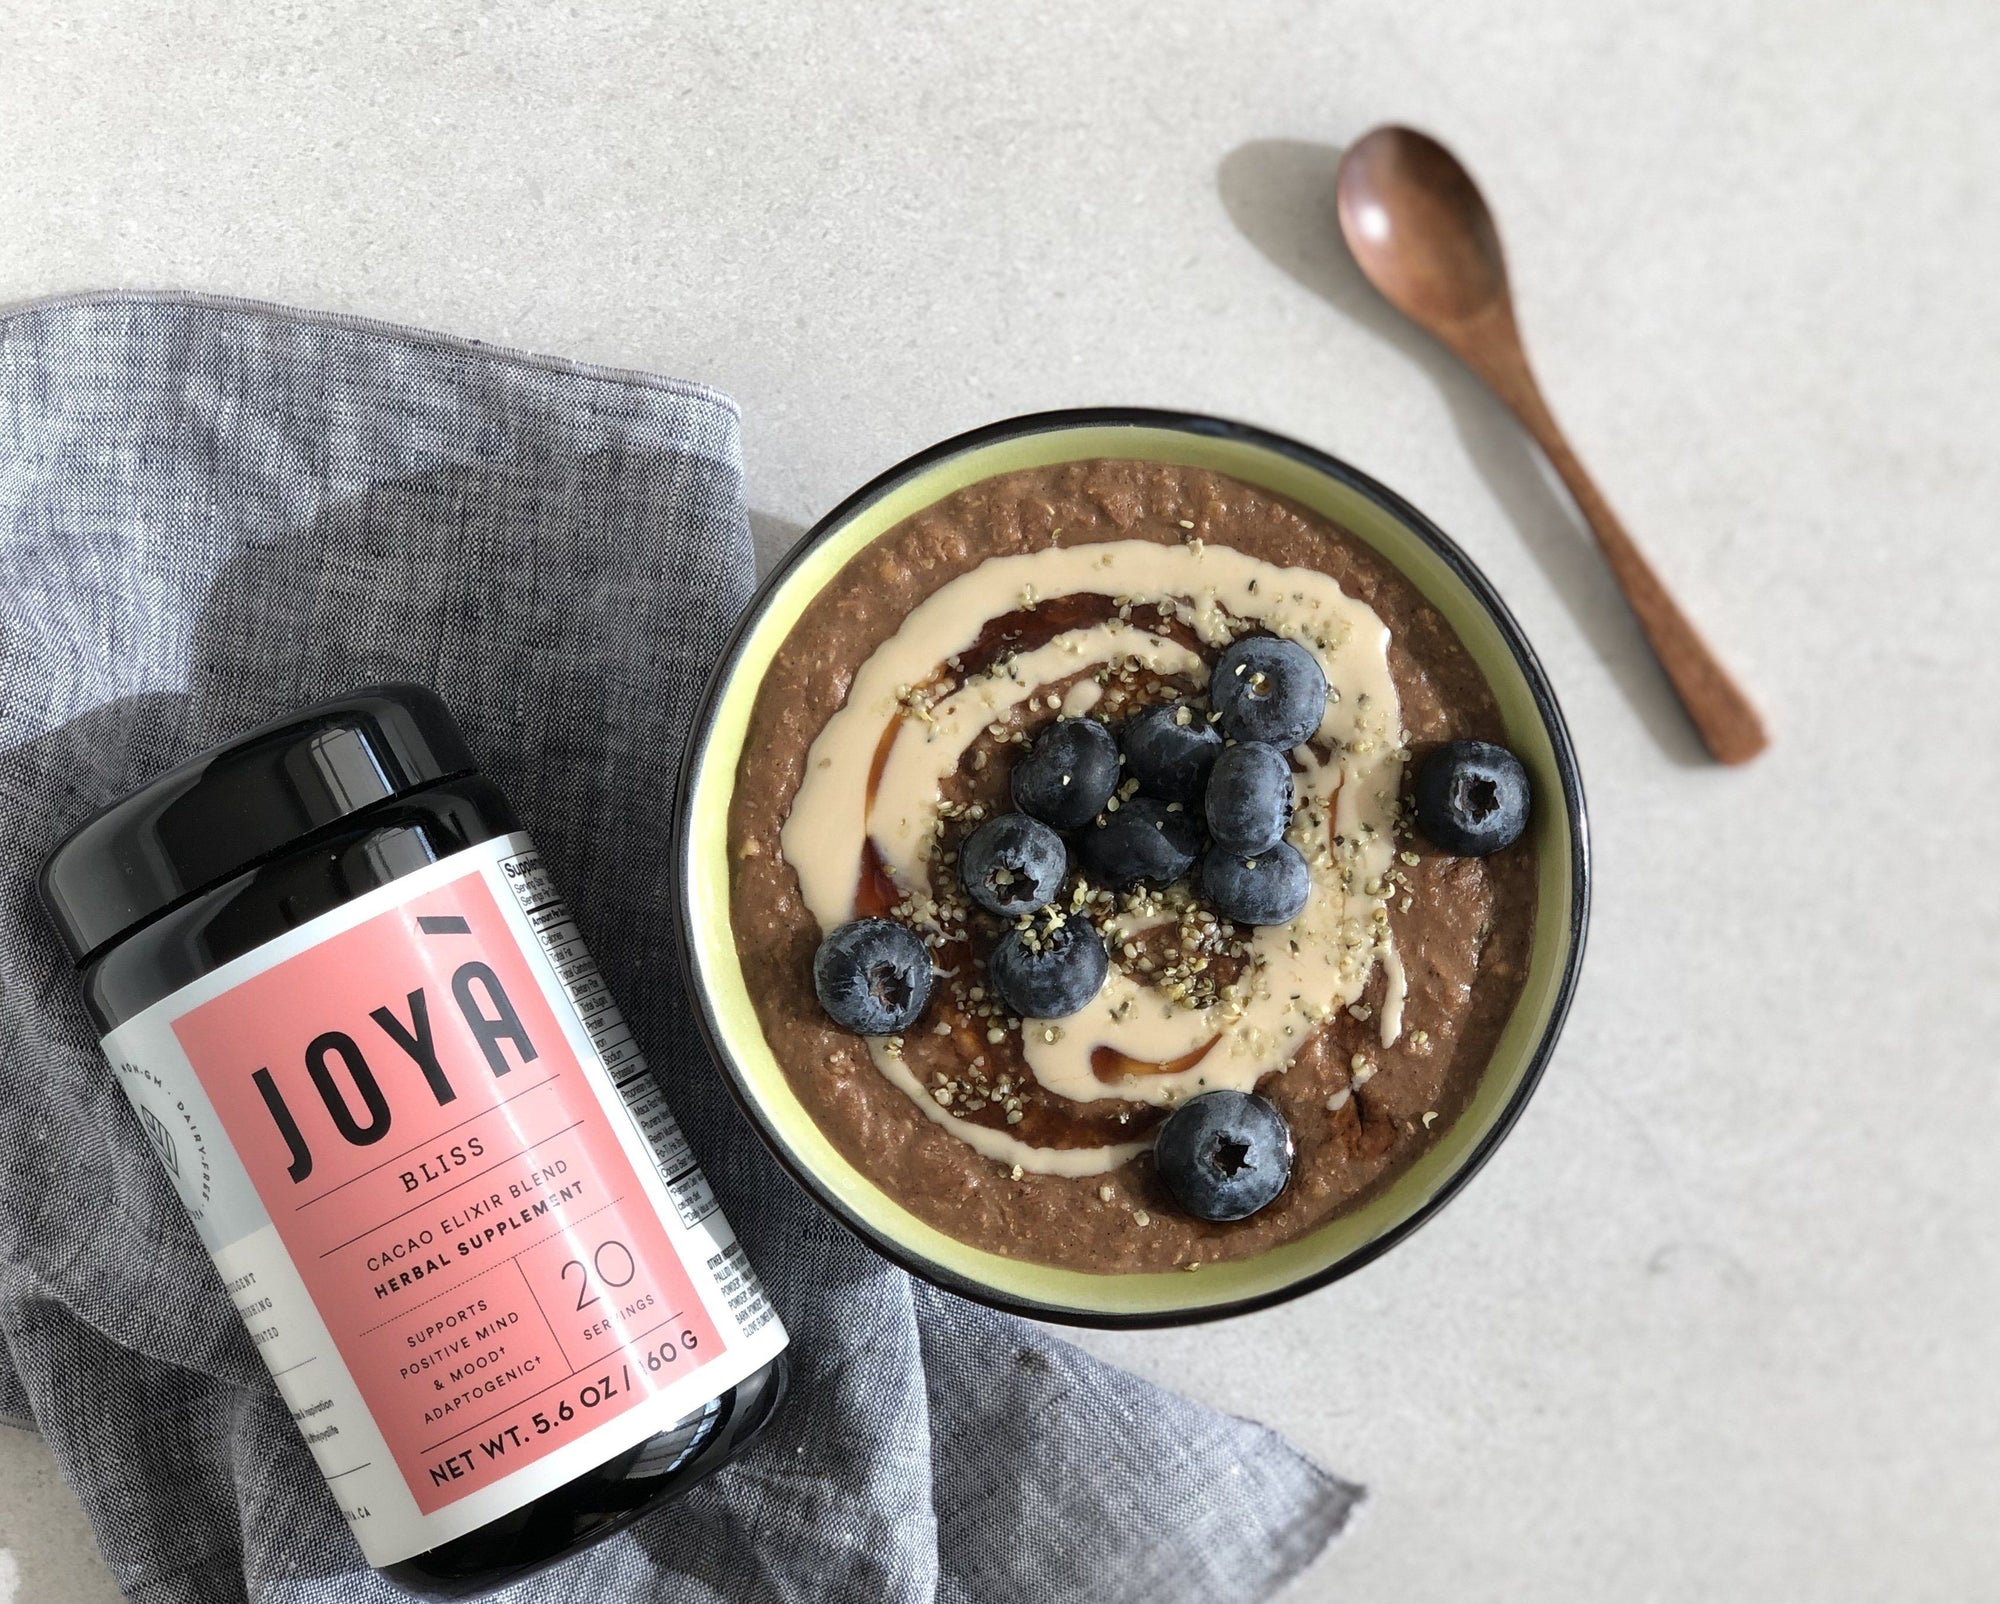 Grain-free cocoa-tahini hot cereal recipe with JOYÀ Bliss cacao elixir blend